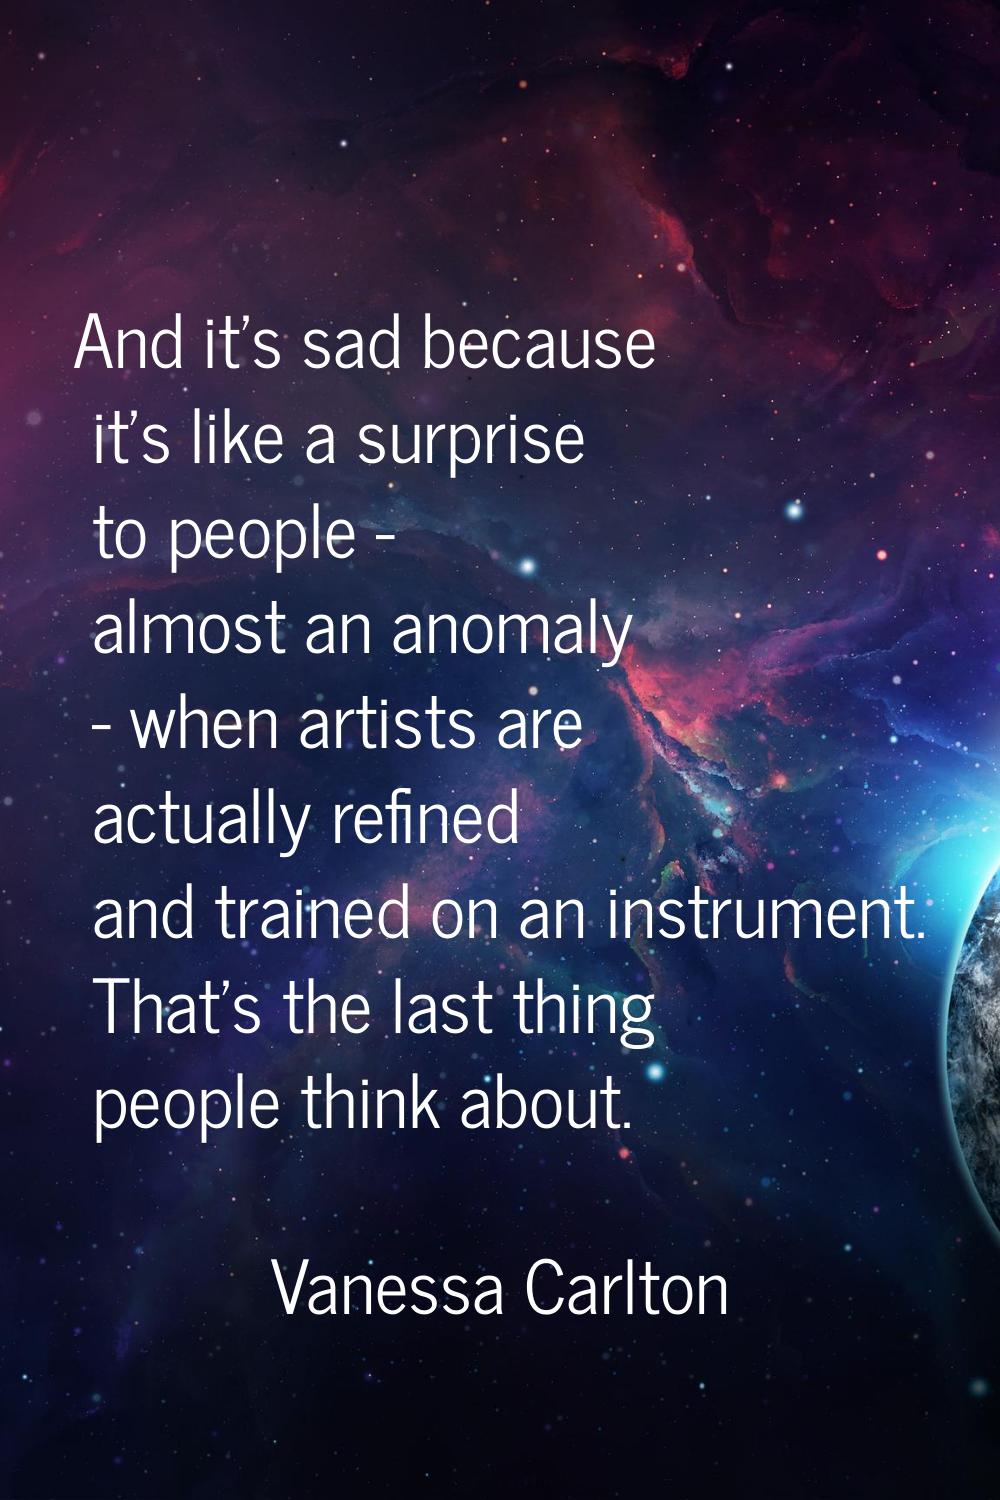 And it's sad because it's like a surprise to people - almost an anomaly - when artists are actually